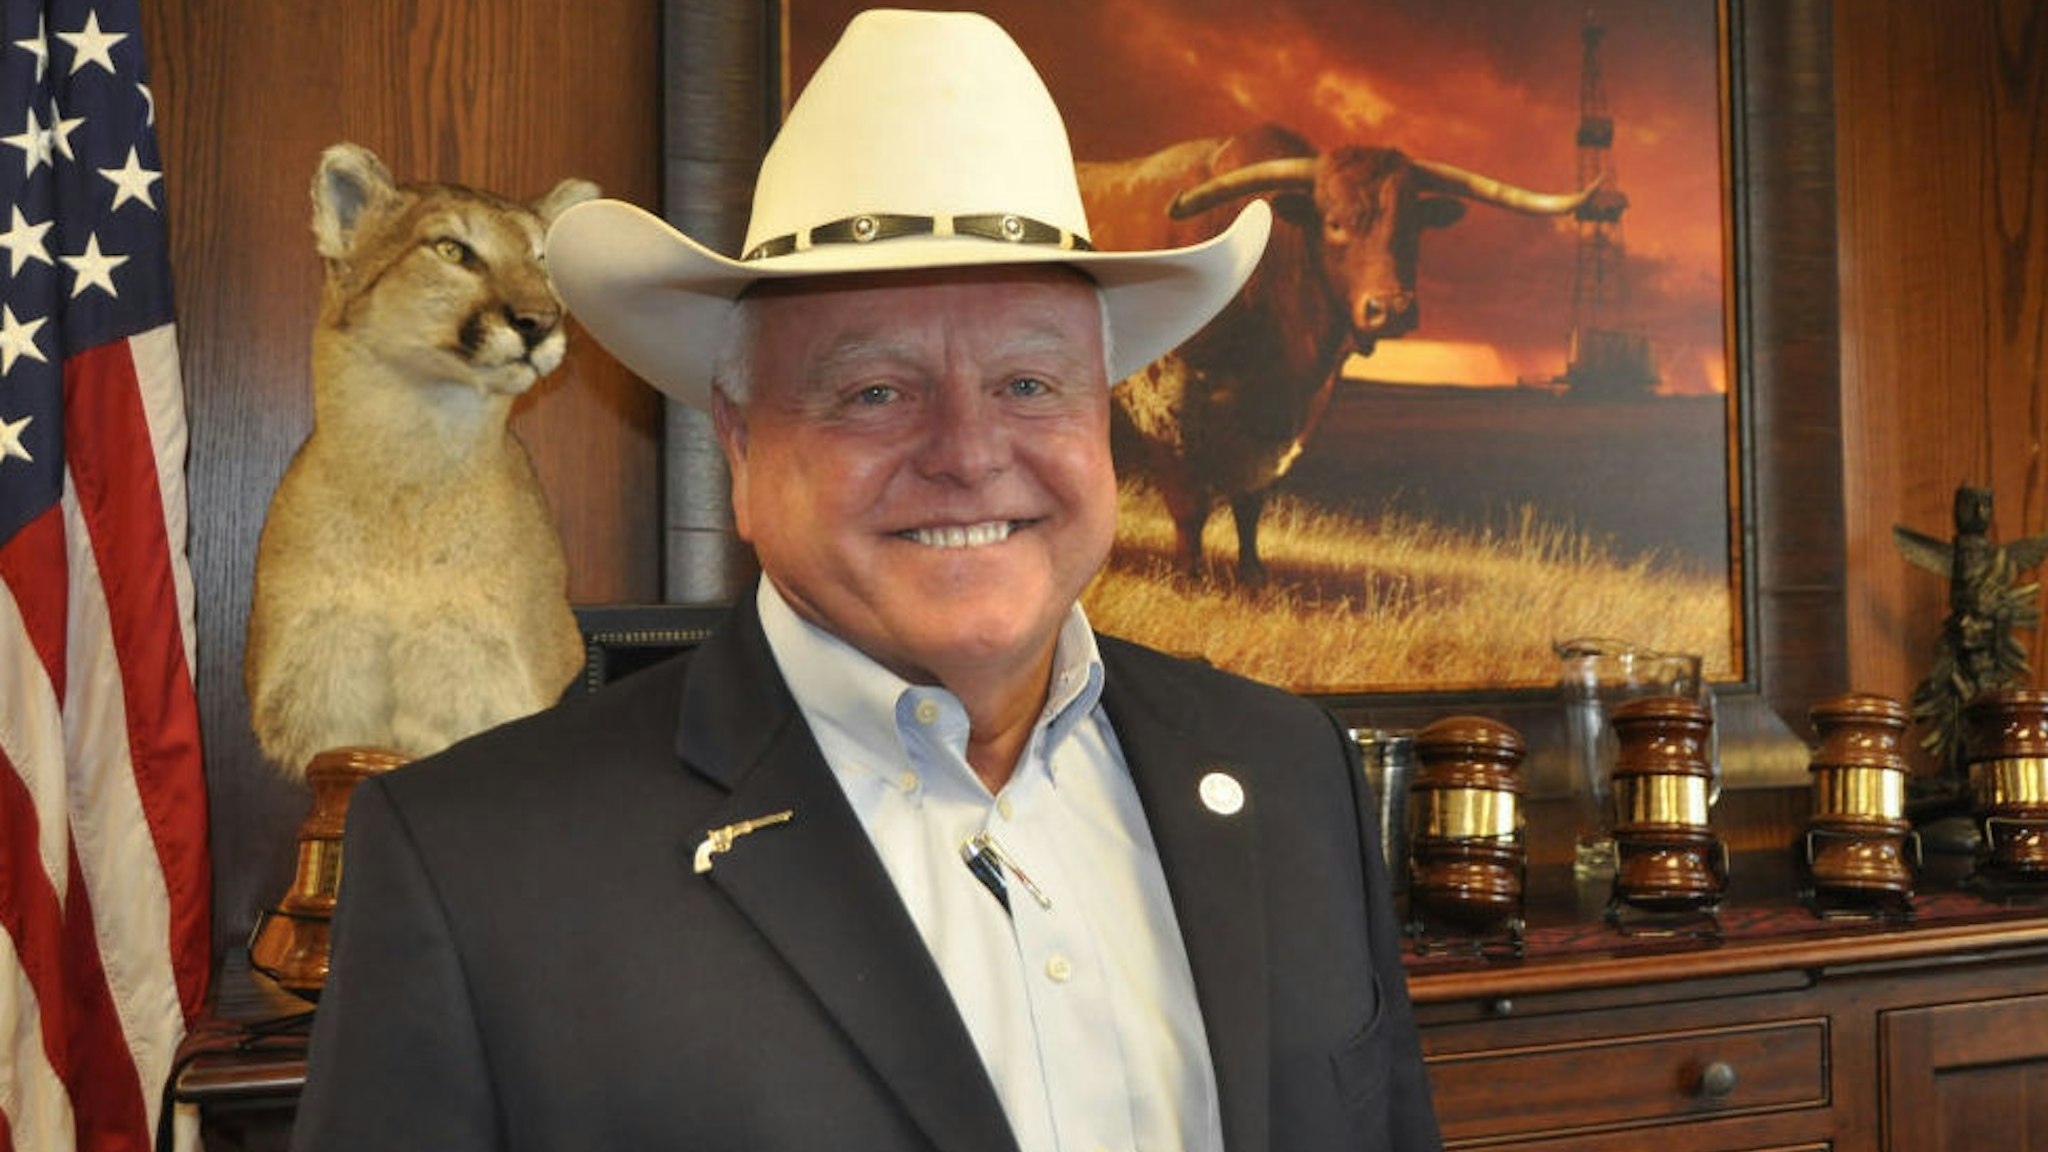 exas state Agriculture Commissioner Sid Miller stands in his office in Austin, USA, 12 September 2016. Miller is part of Donald Trump's team of advisers.